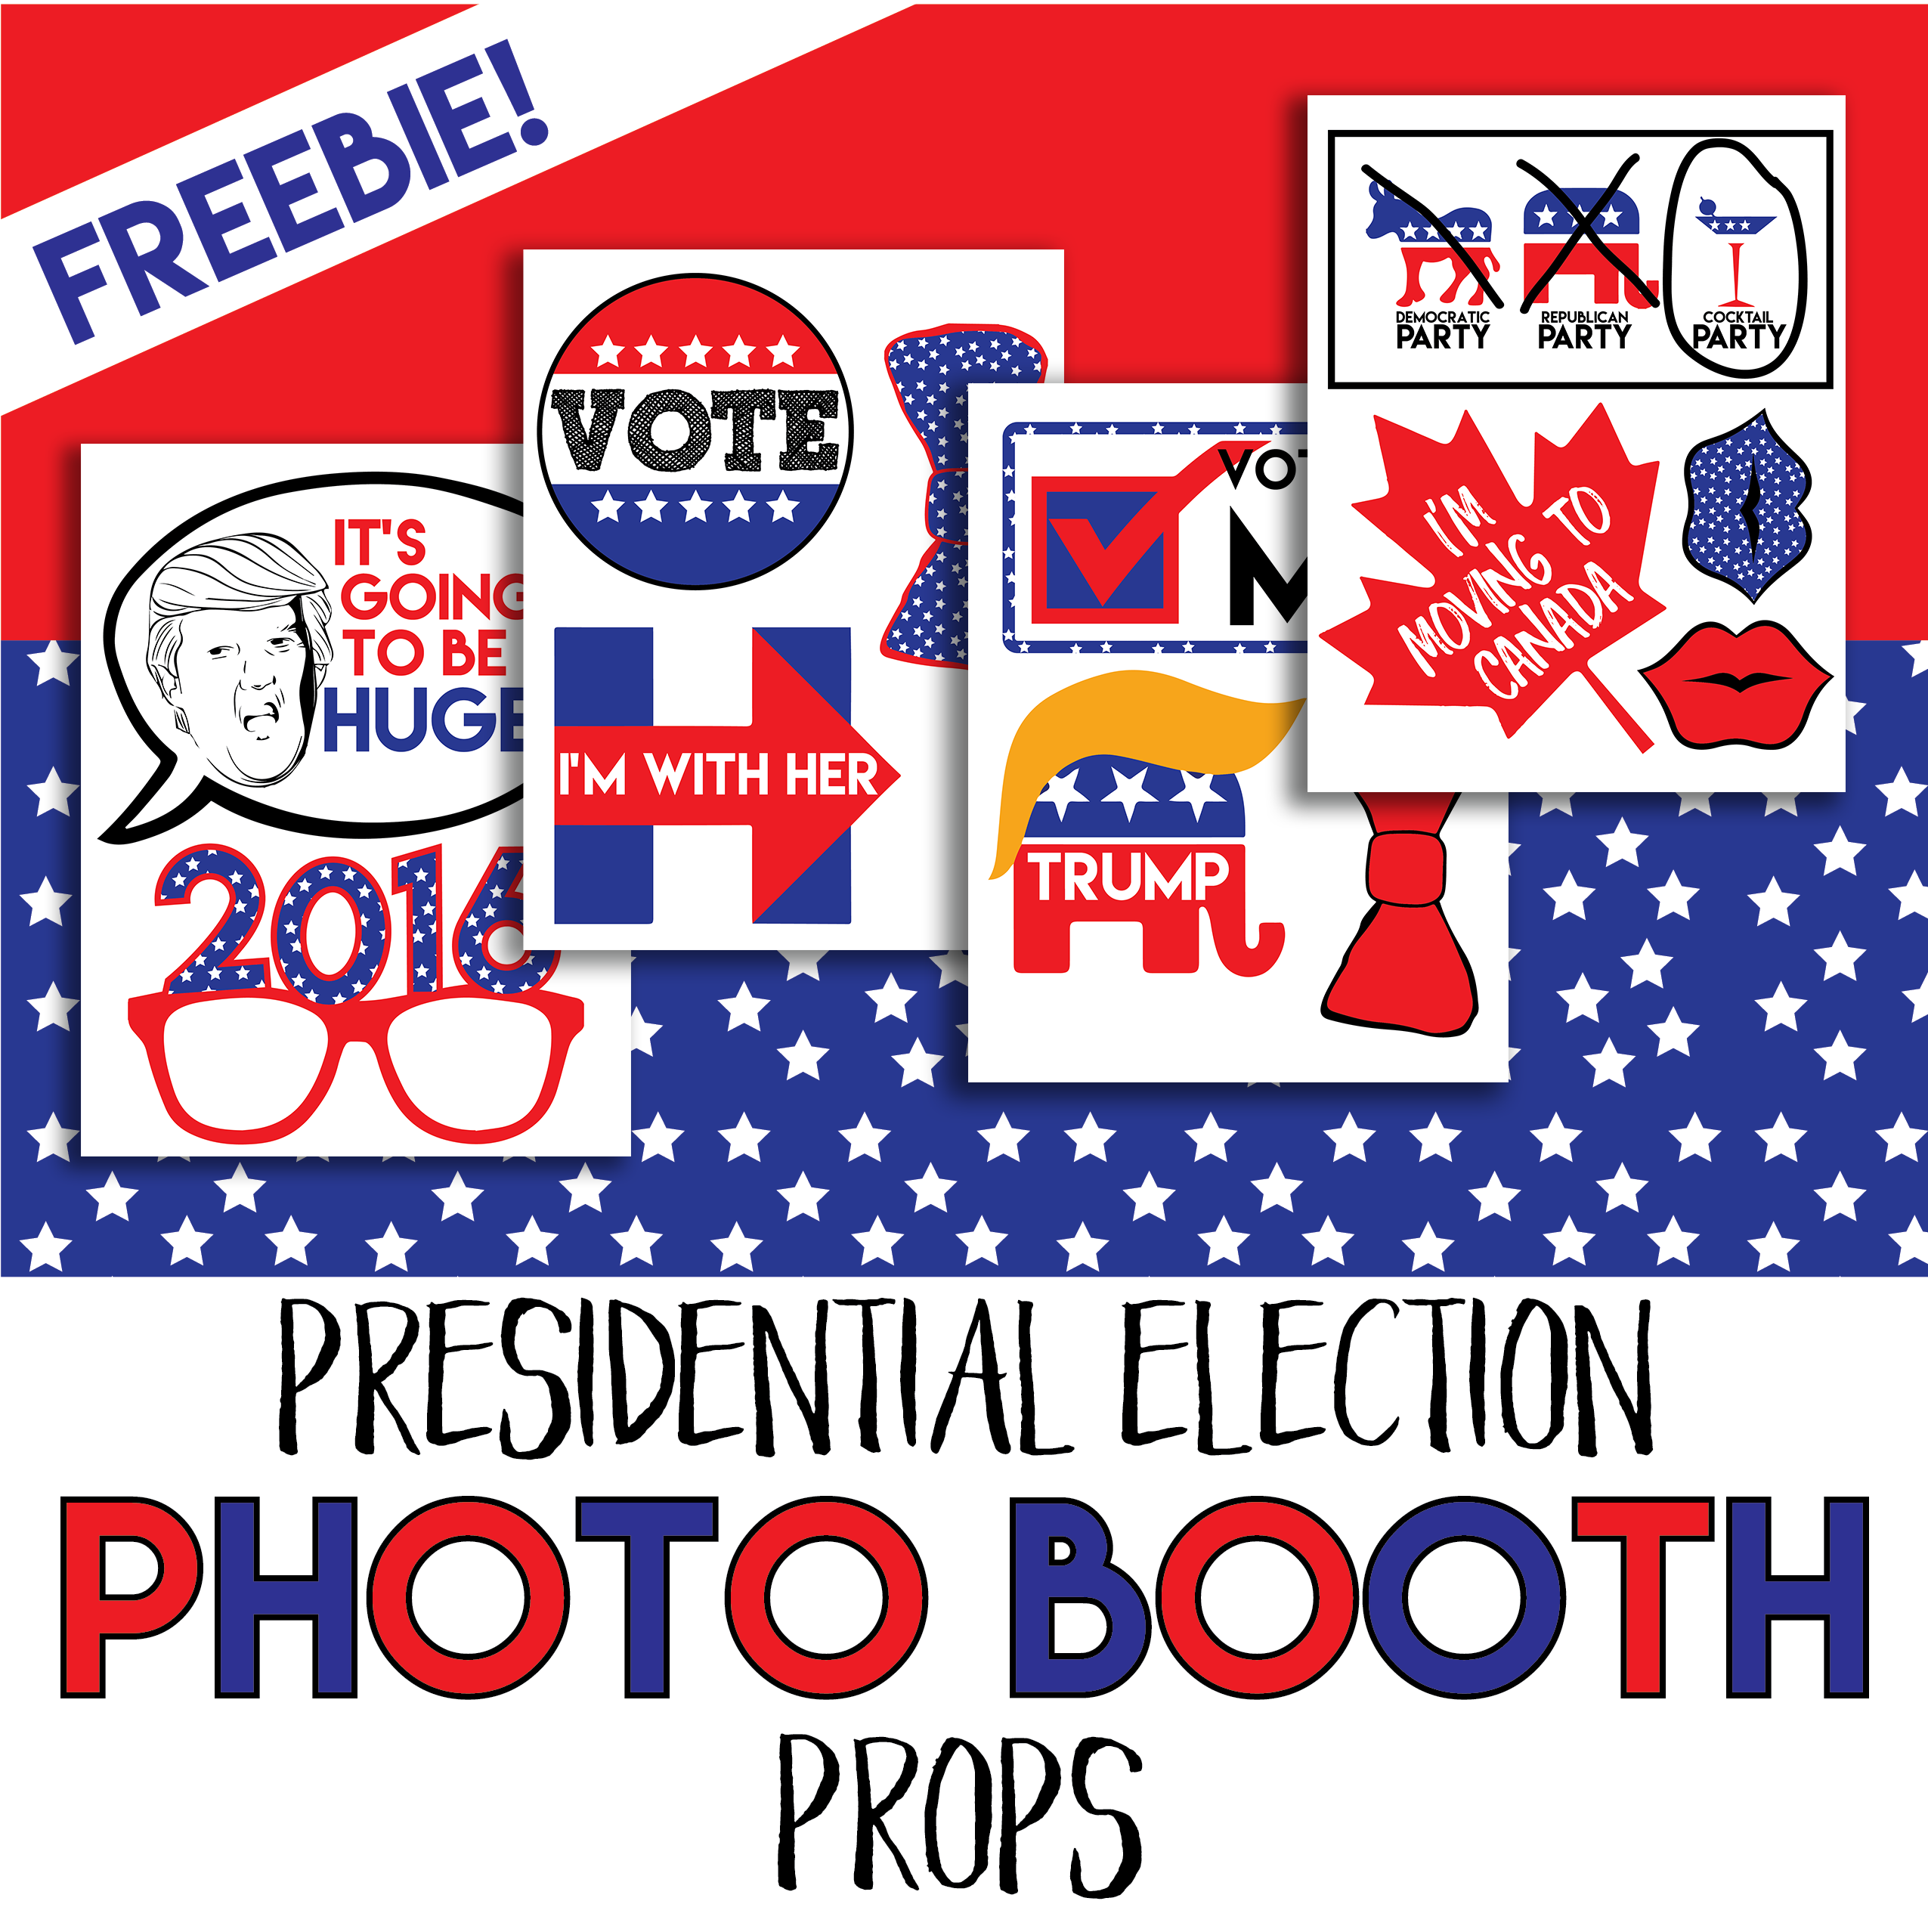 Free Printable: Presidential Election Photo Booth Props